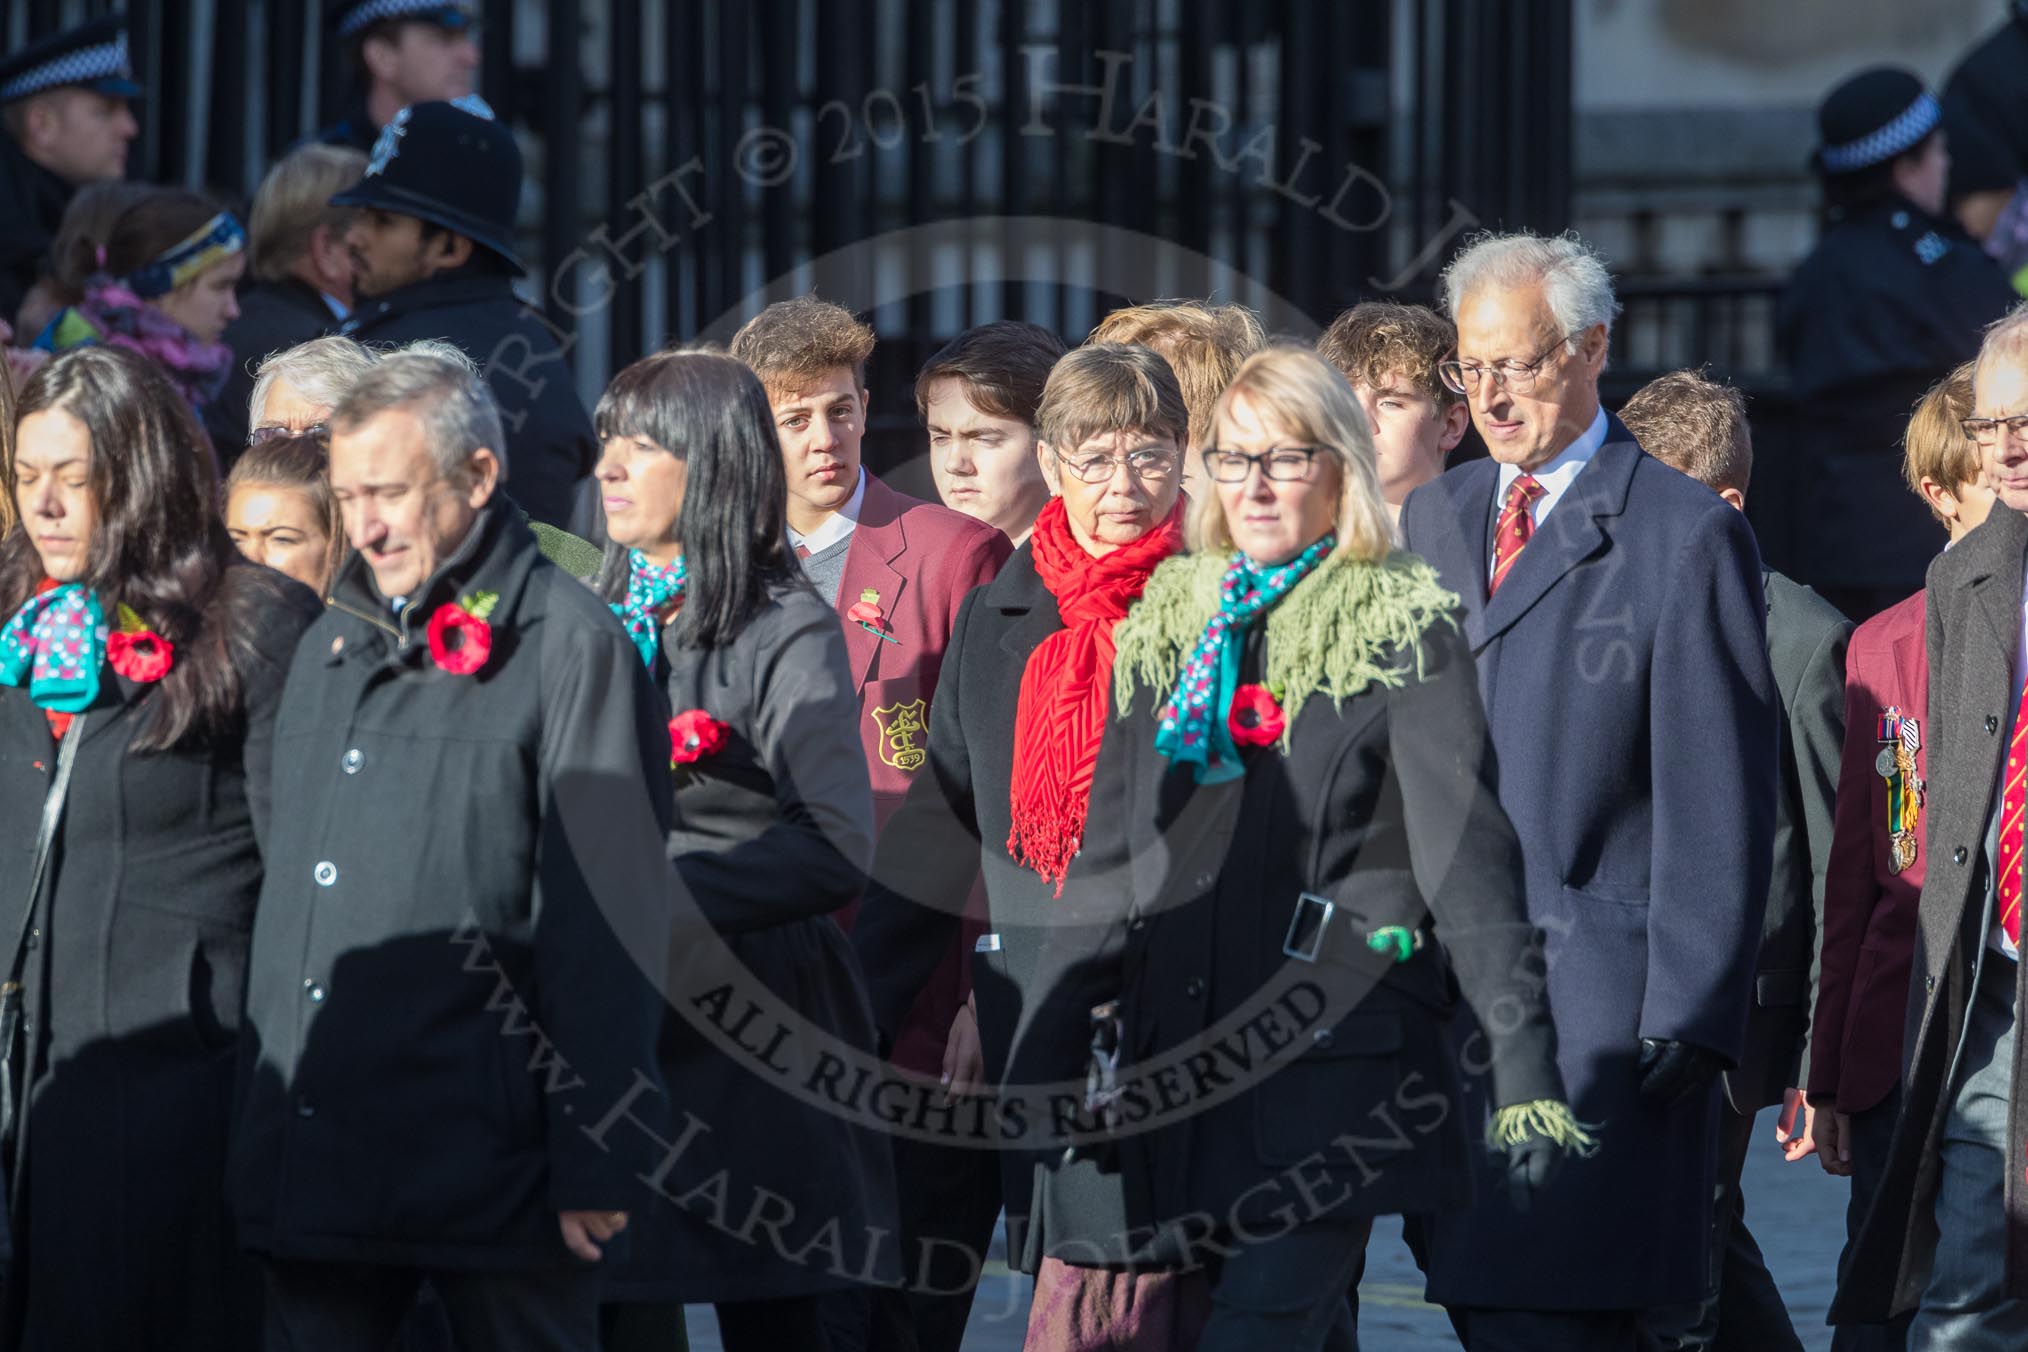 March Past, Remembrance Sunday at the Cenotaph 2016: M19 PDSA.
Cenotaph, Whitehall, London SW1,
London,
Greater London,
United Kingdom,
on 13 November 2016 at 13:16, image #2648